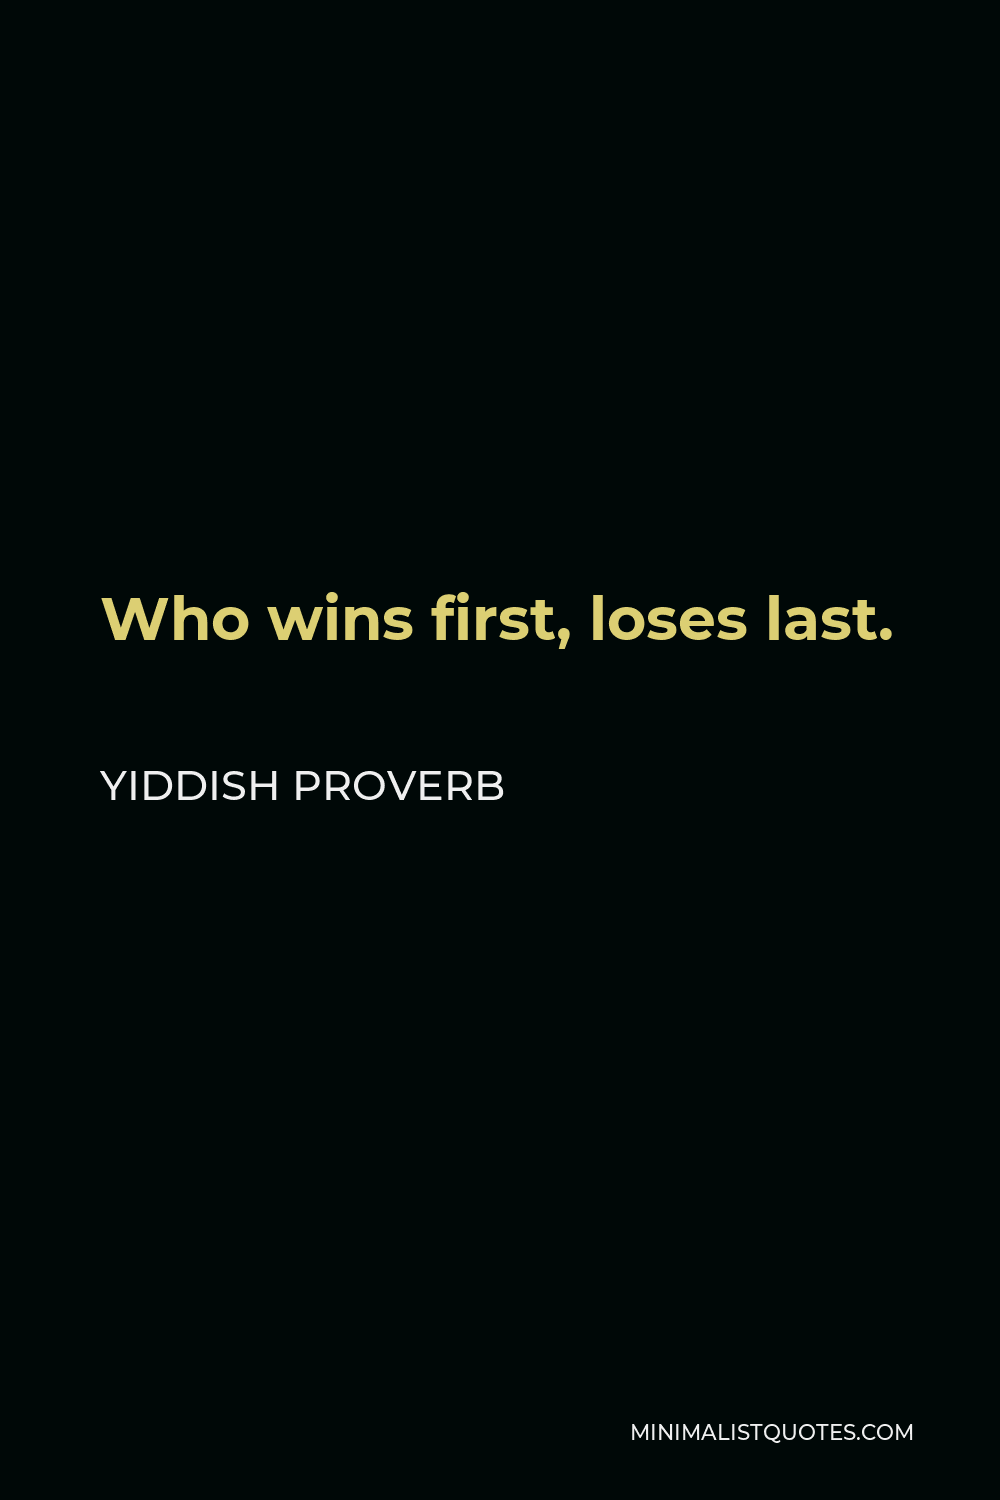 Yiddish Proverb Quote - Who wins first, loses last.